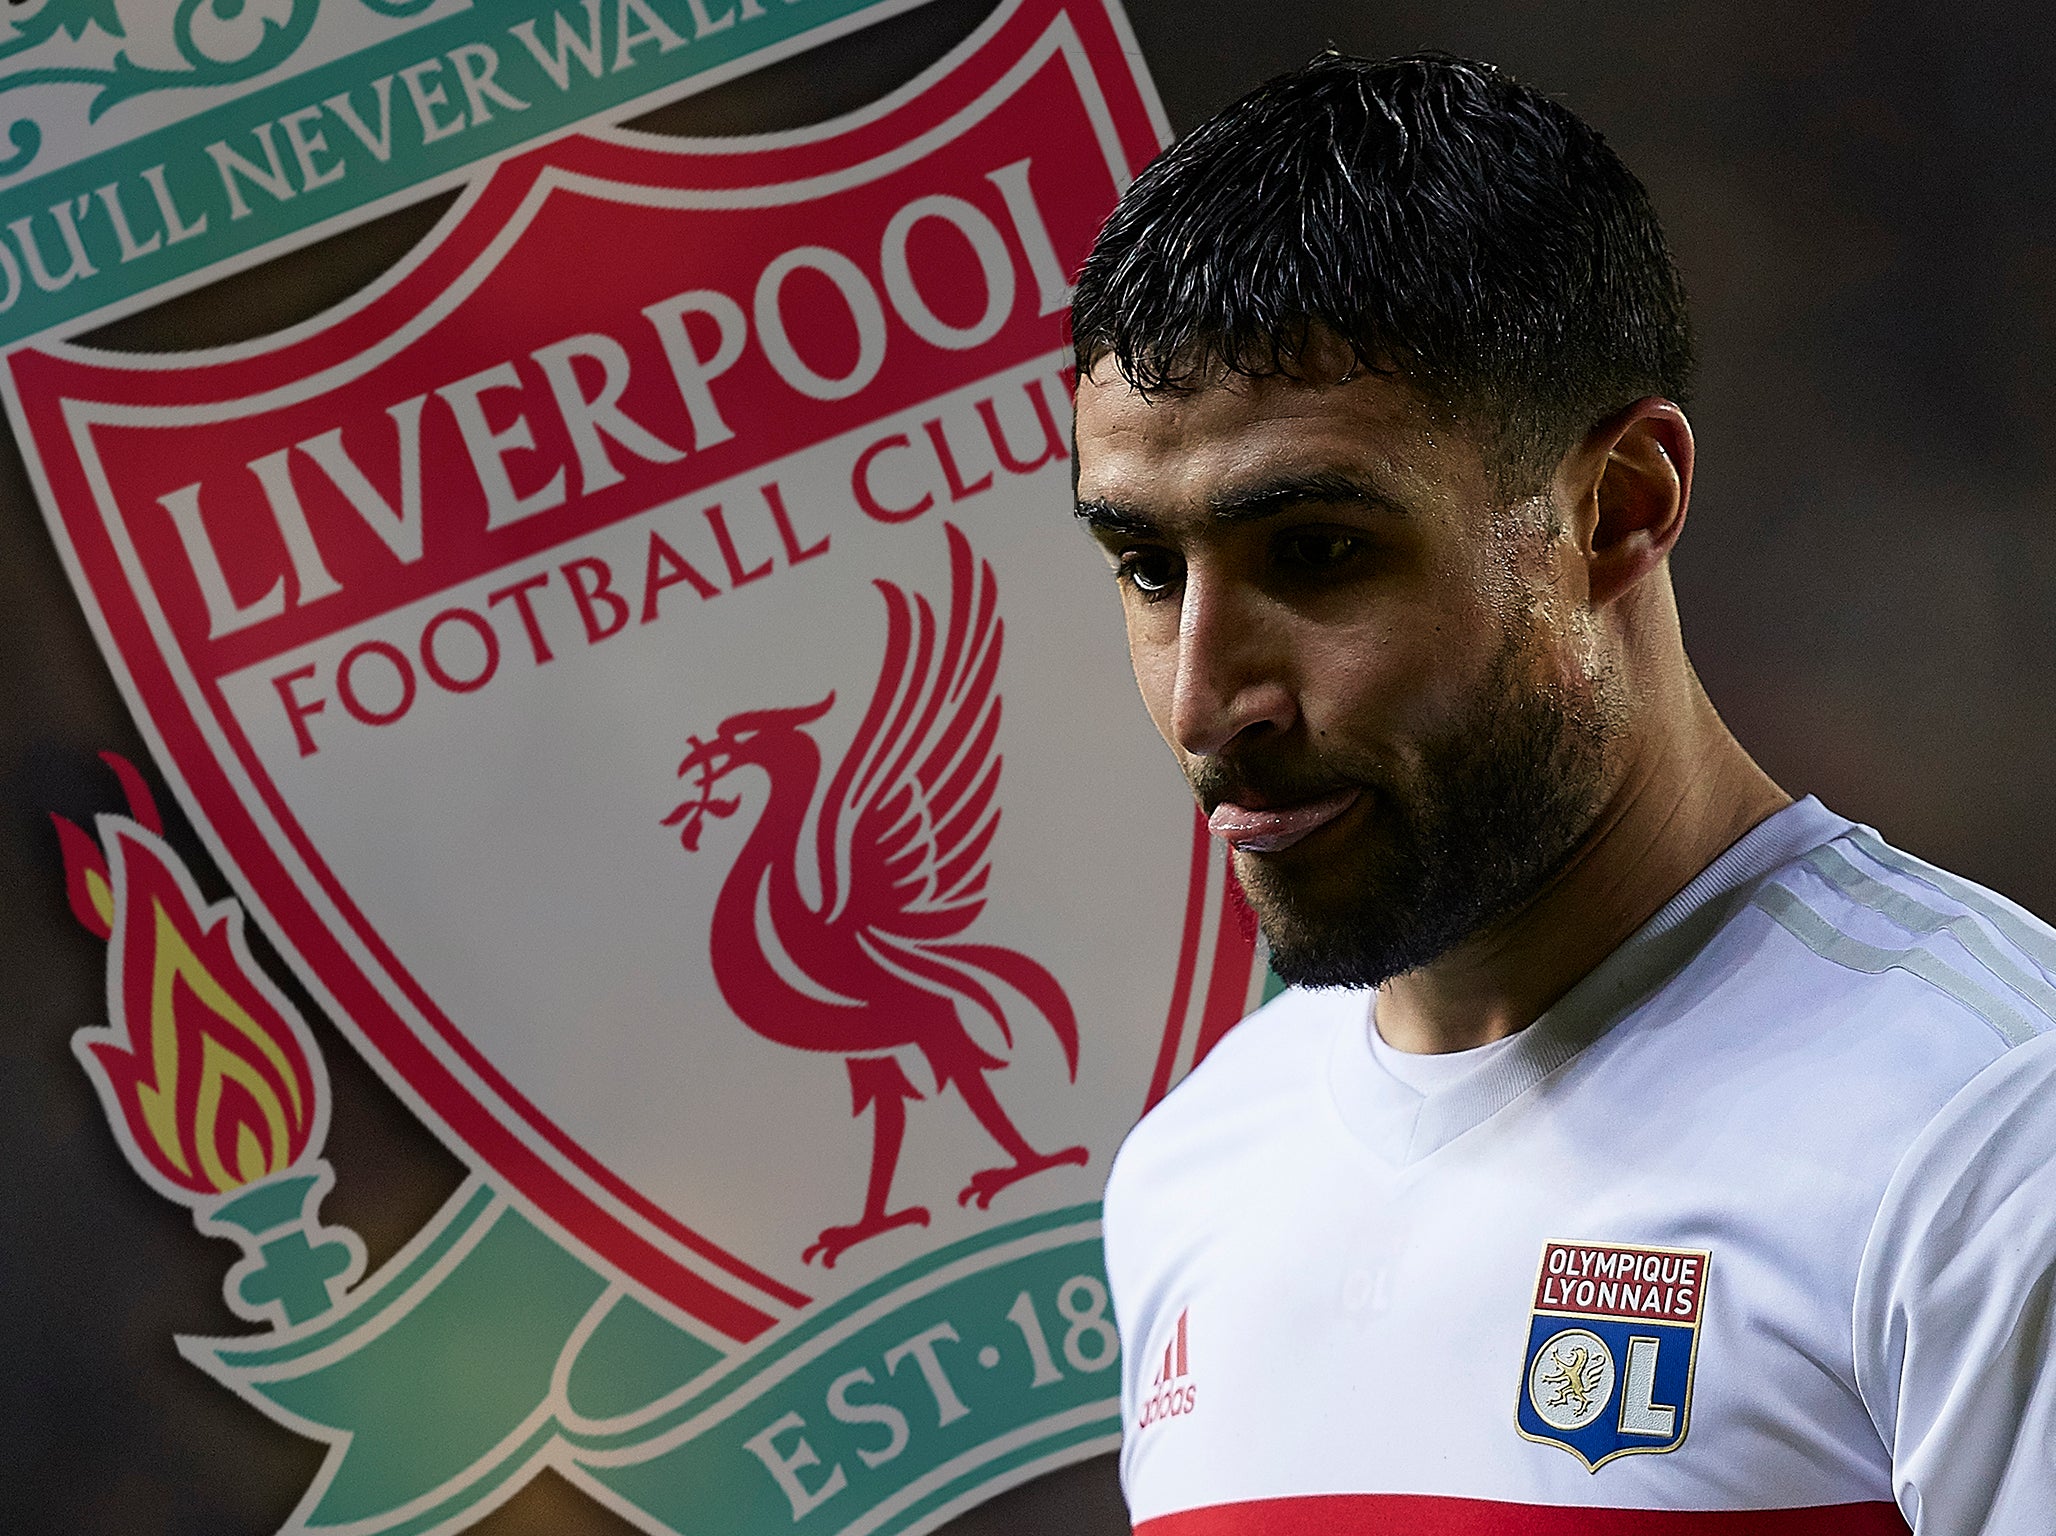 Transfer news, rumours LIVE - Nabil Fekir reignites Liverpool move, Arsenal to continue spending, Chelsea rival City, Manchester United latest gossip